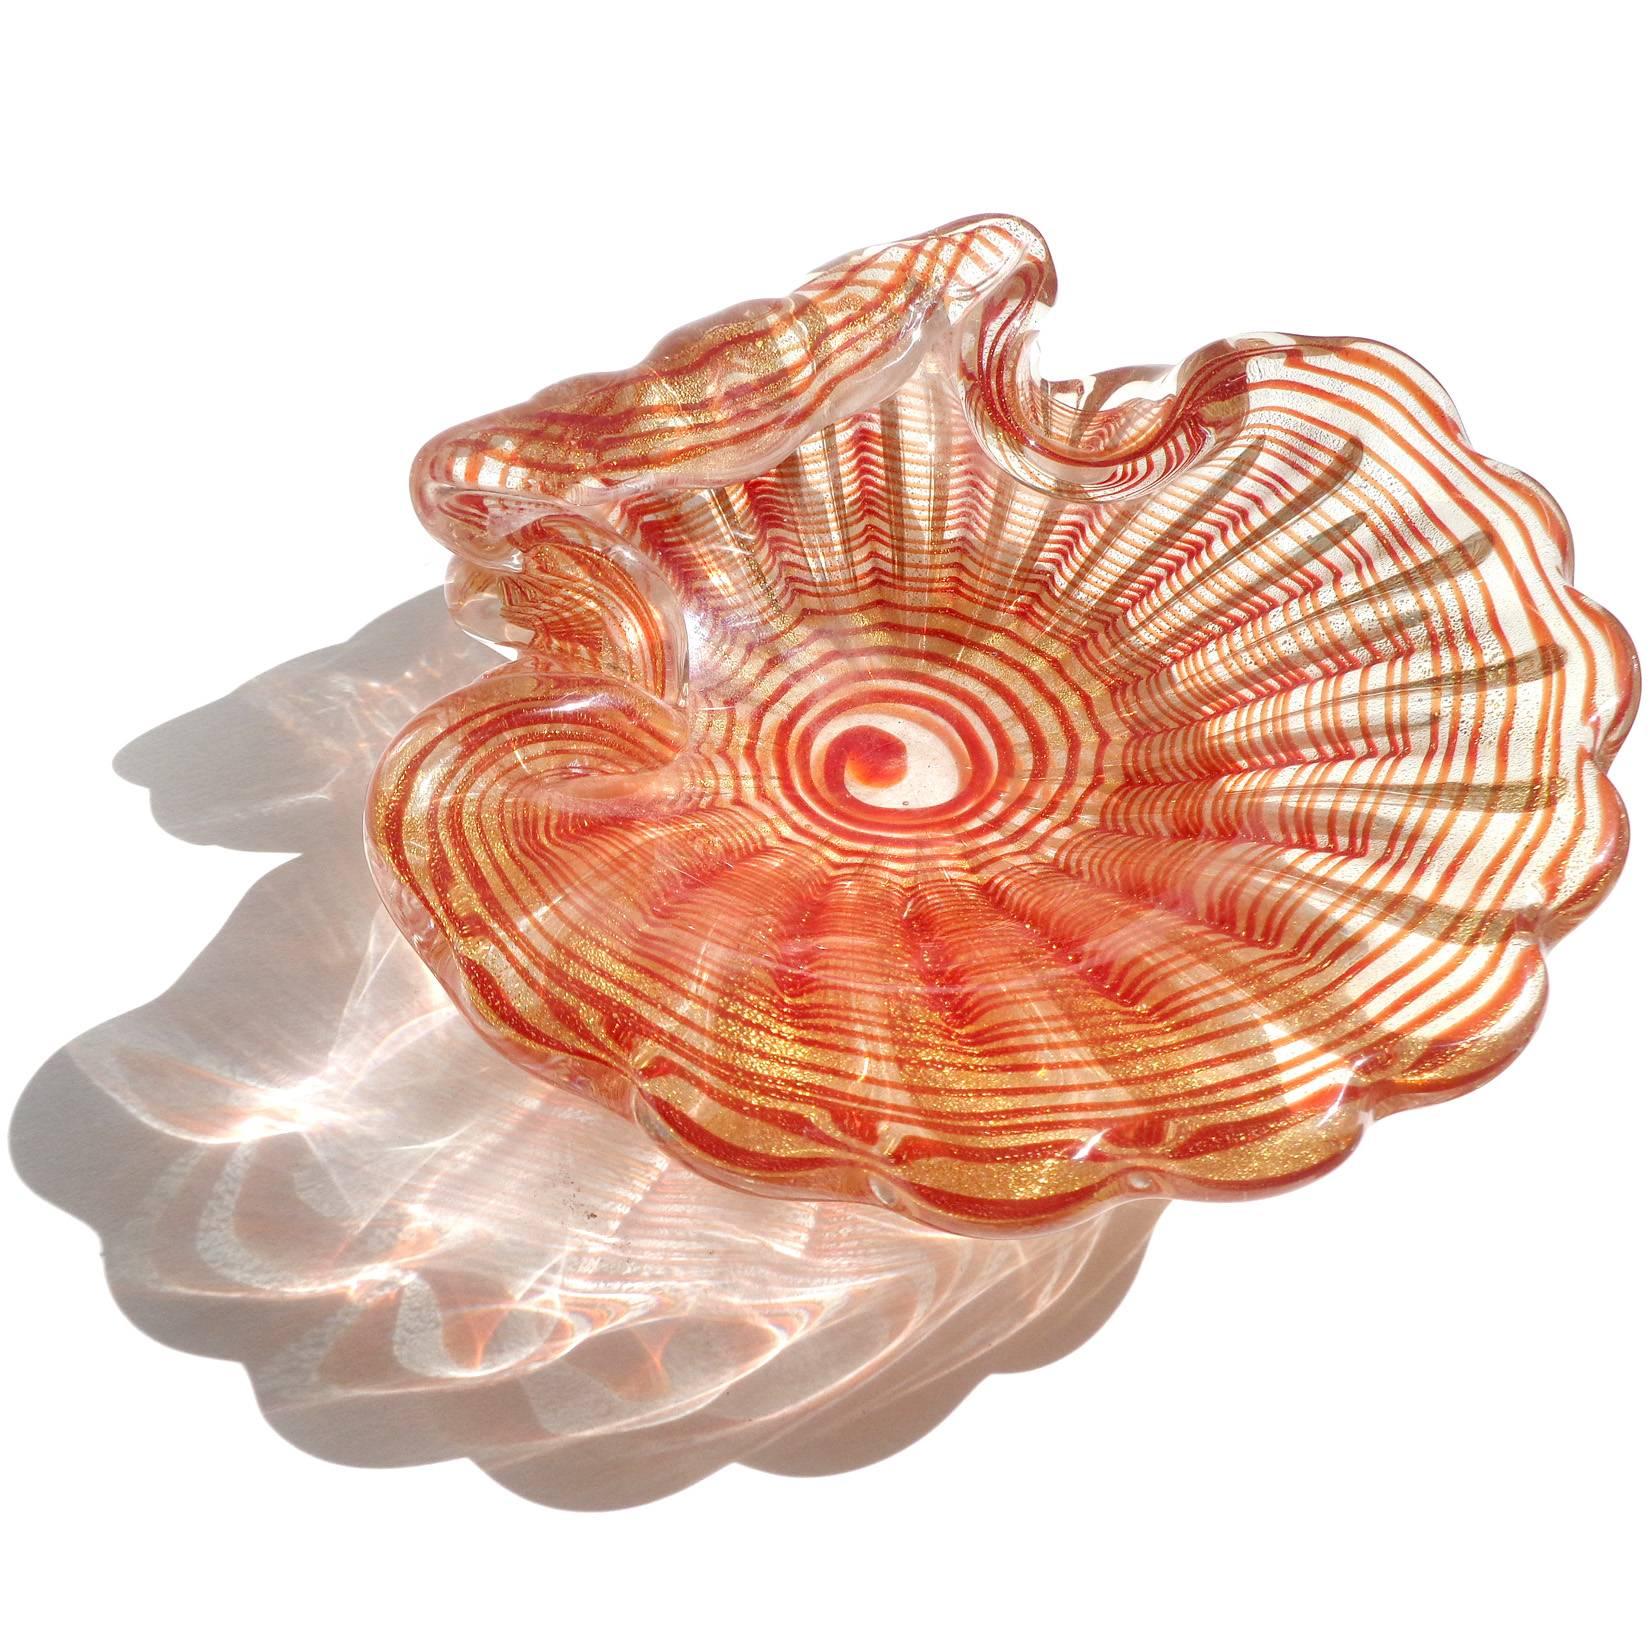 FREE Shipping Worldwide! See details below description.

Murano hand blown red optic swirl and gold flecks art glass shell shaped bowl. Attributed to the Barovier e Toso company. Just beautiful!

Please look at my exclusive 1stdibs Storefront